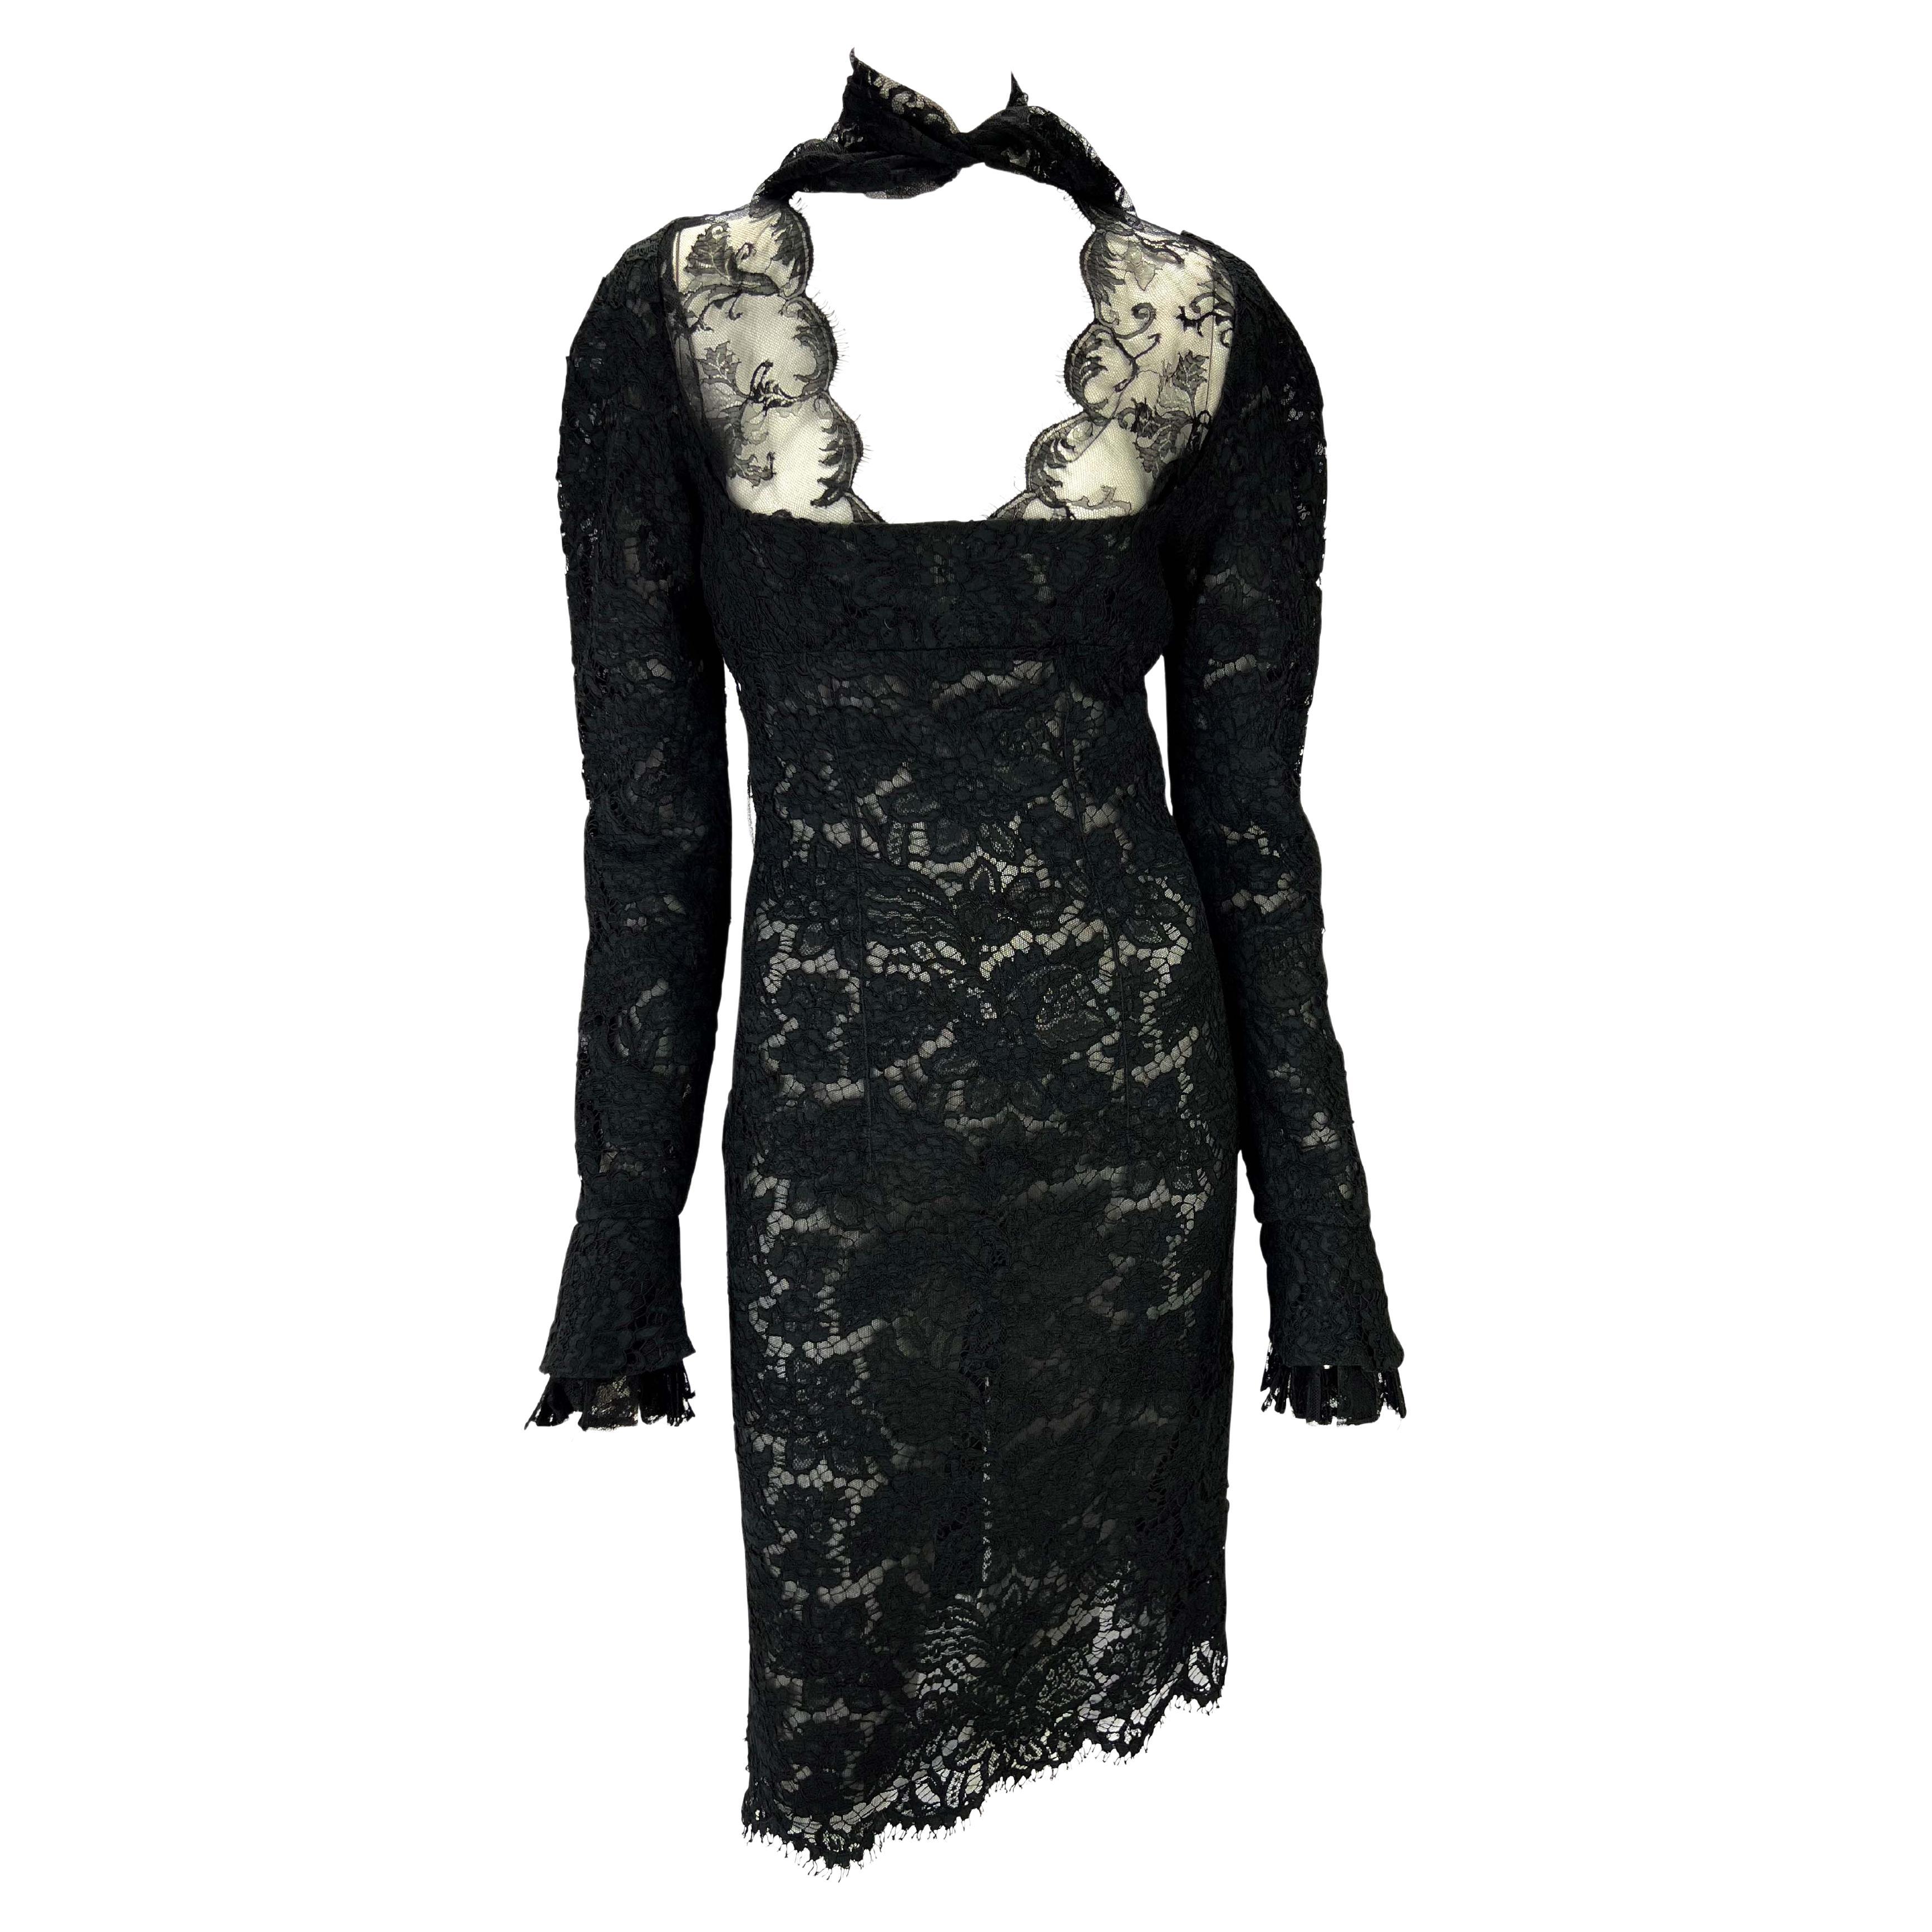 F/W 2002 Yves Saint Laurent by Tom Ford Runway Sheer Black Lace Poet's Dress For Sale 3